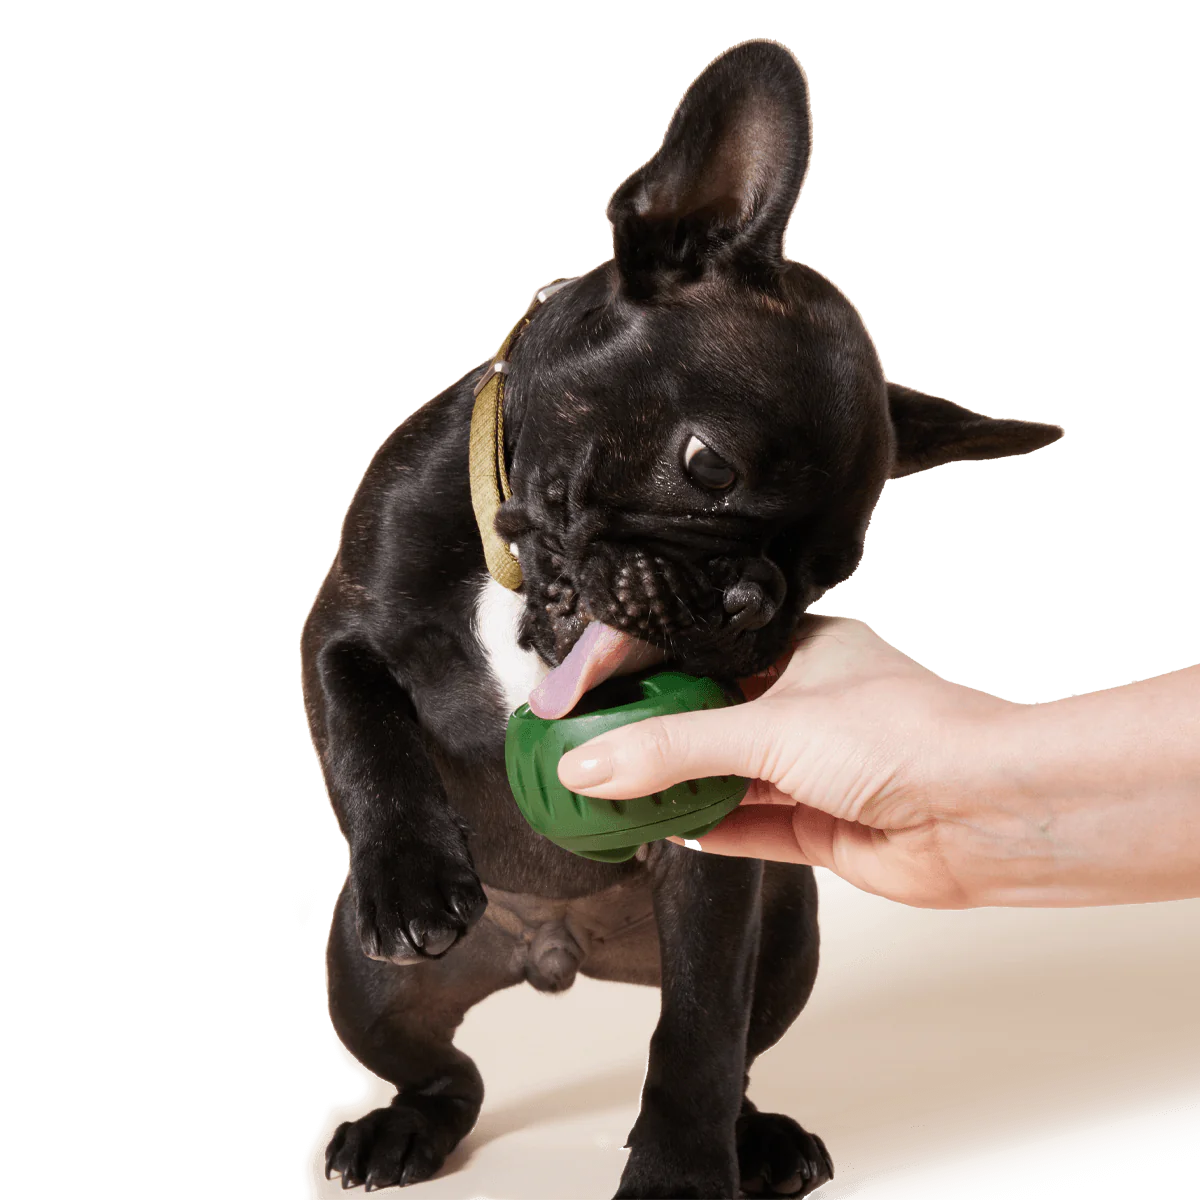 Woof Dog Products - The Amazing Pupsicle